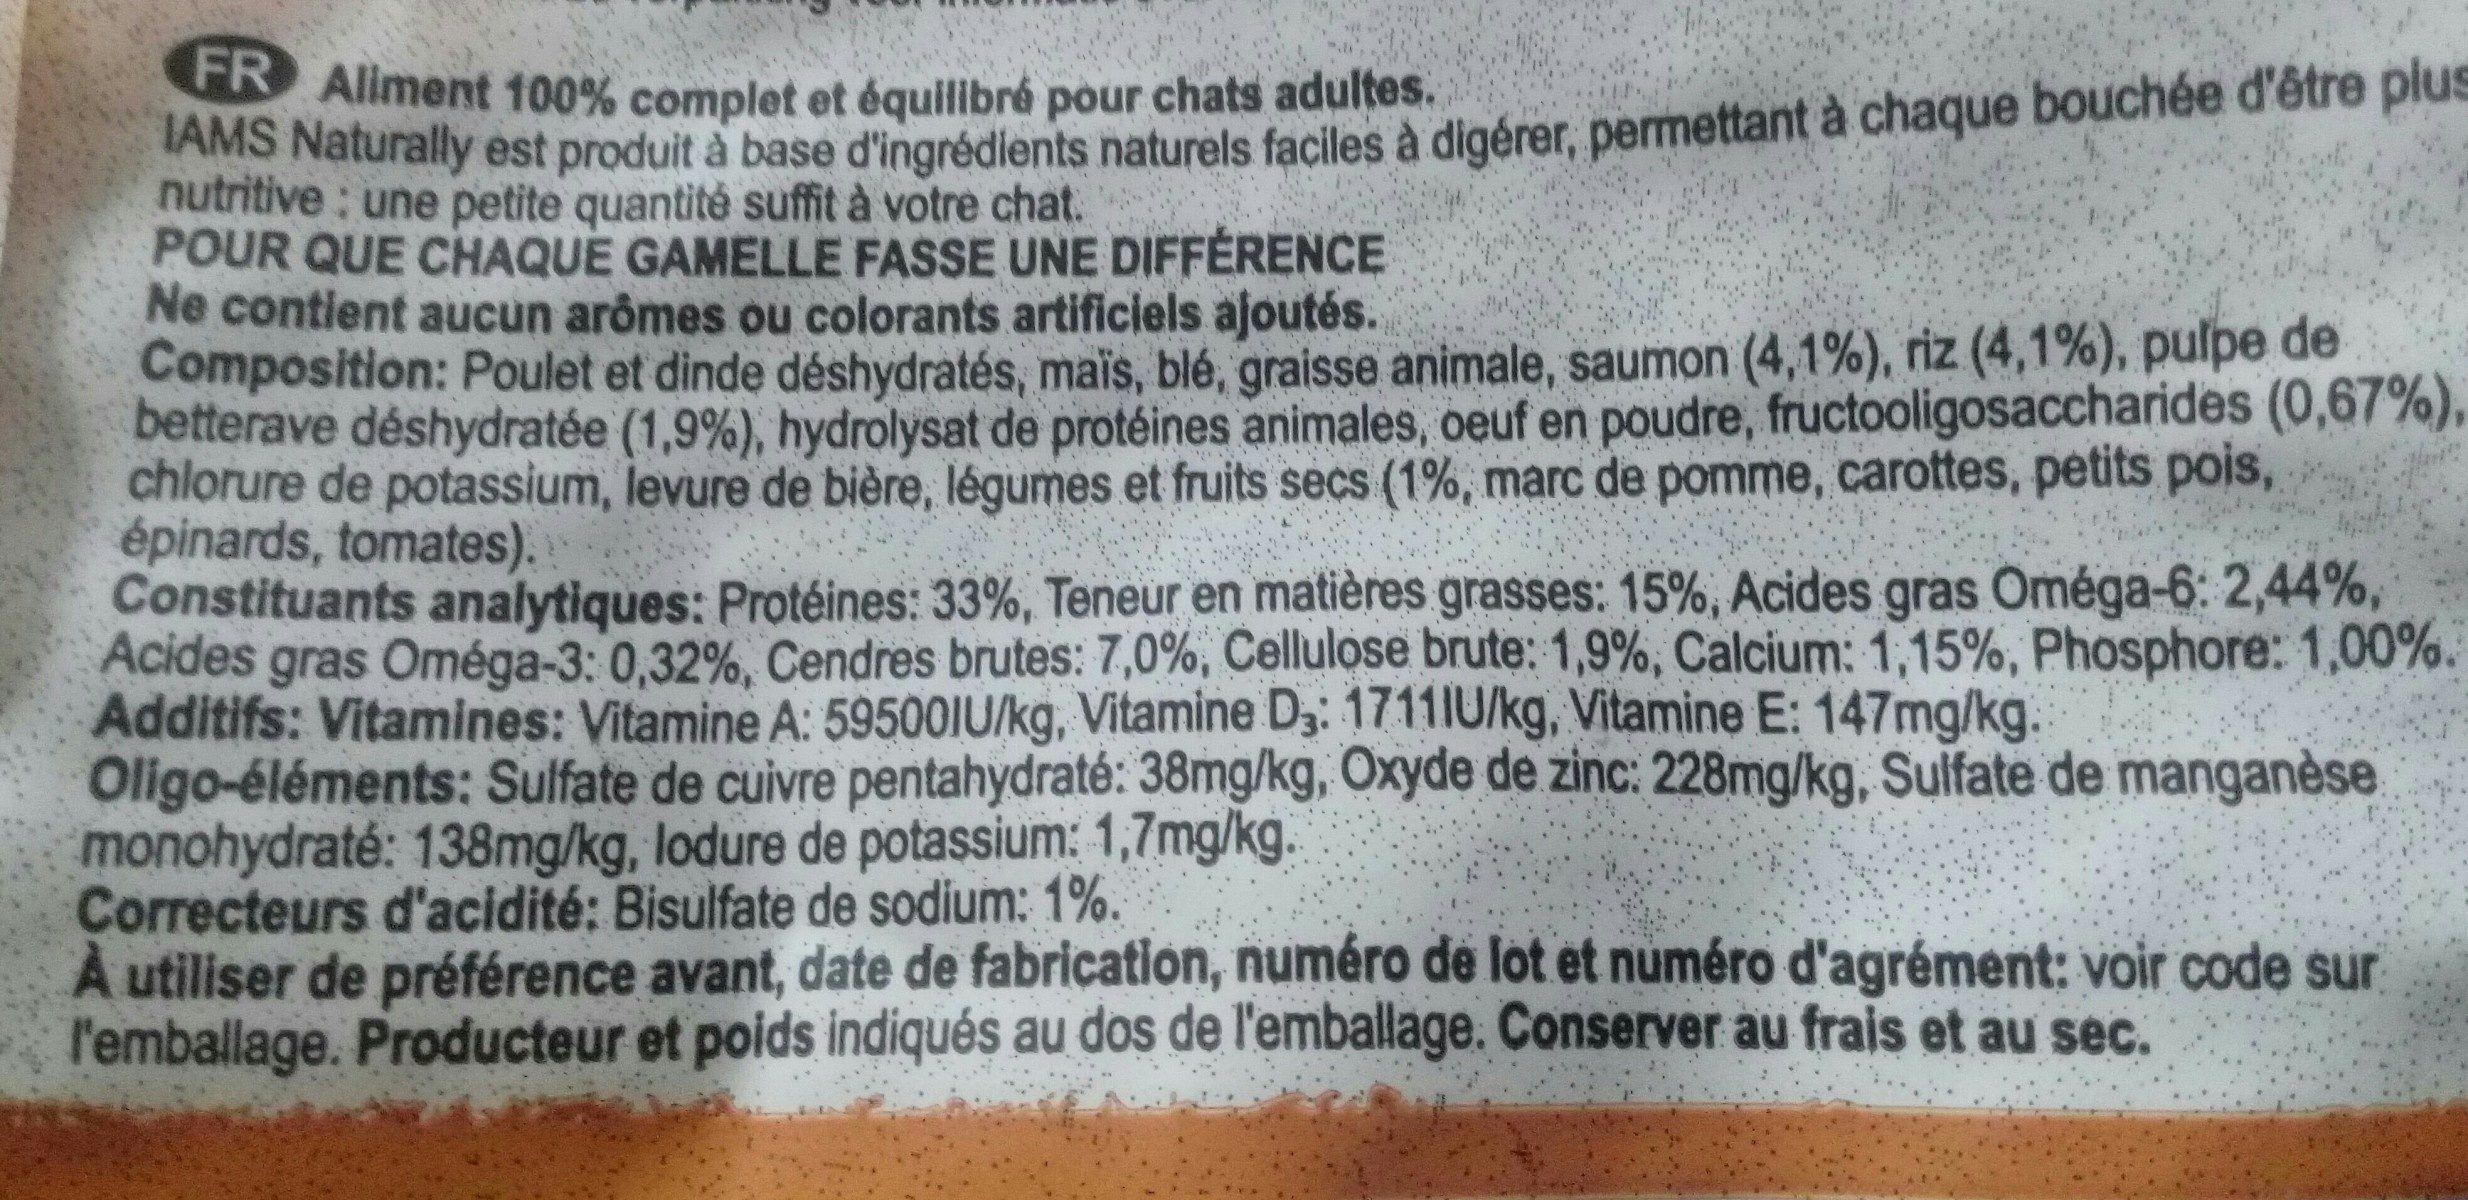 Iams Naturally Adult Cat Salmon and Rice - Ingredients - fr